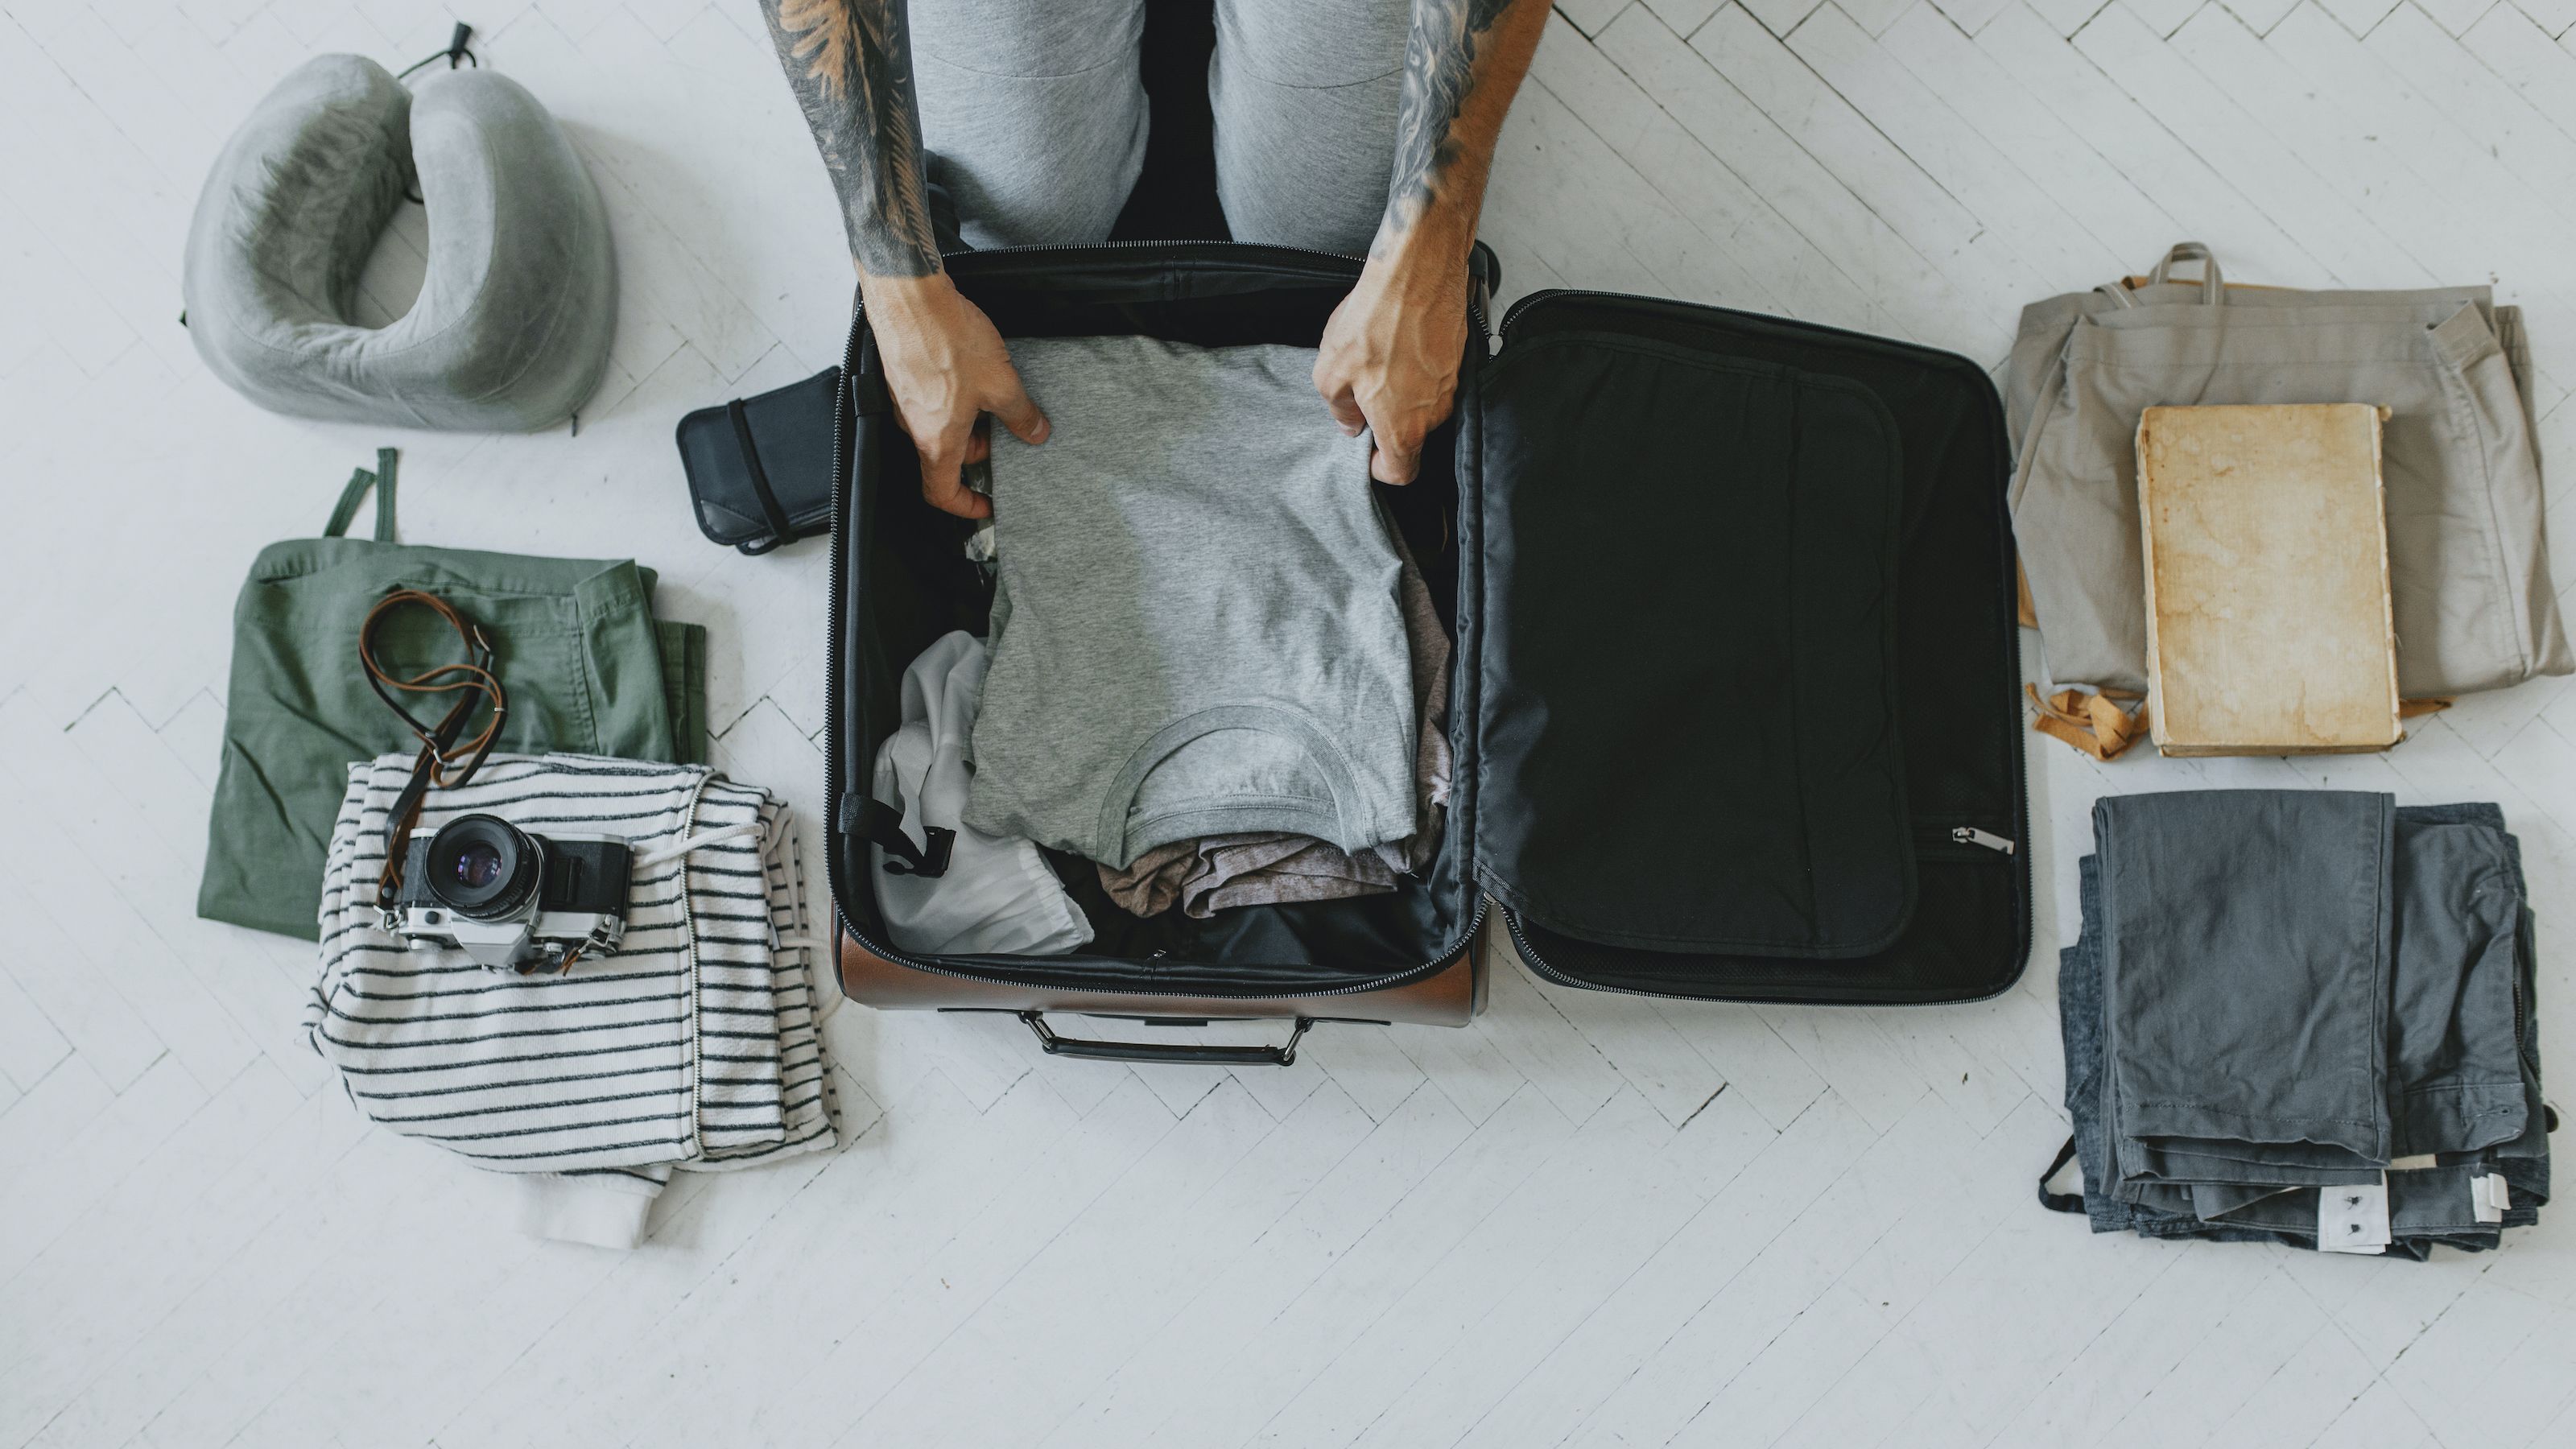 Cabin Luggage Size: A Guide to Hand Baggage Restrictions for